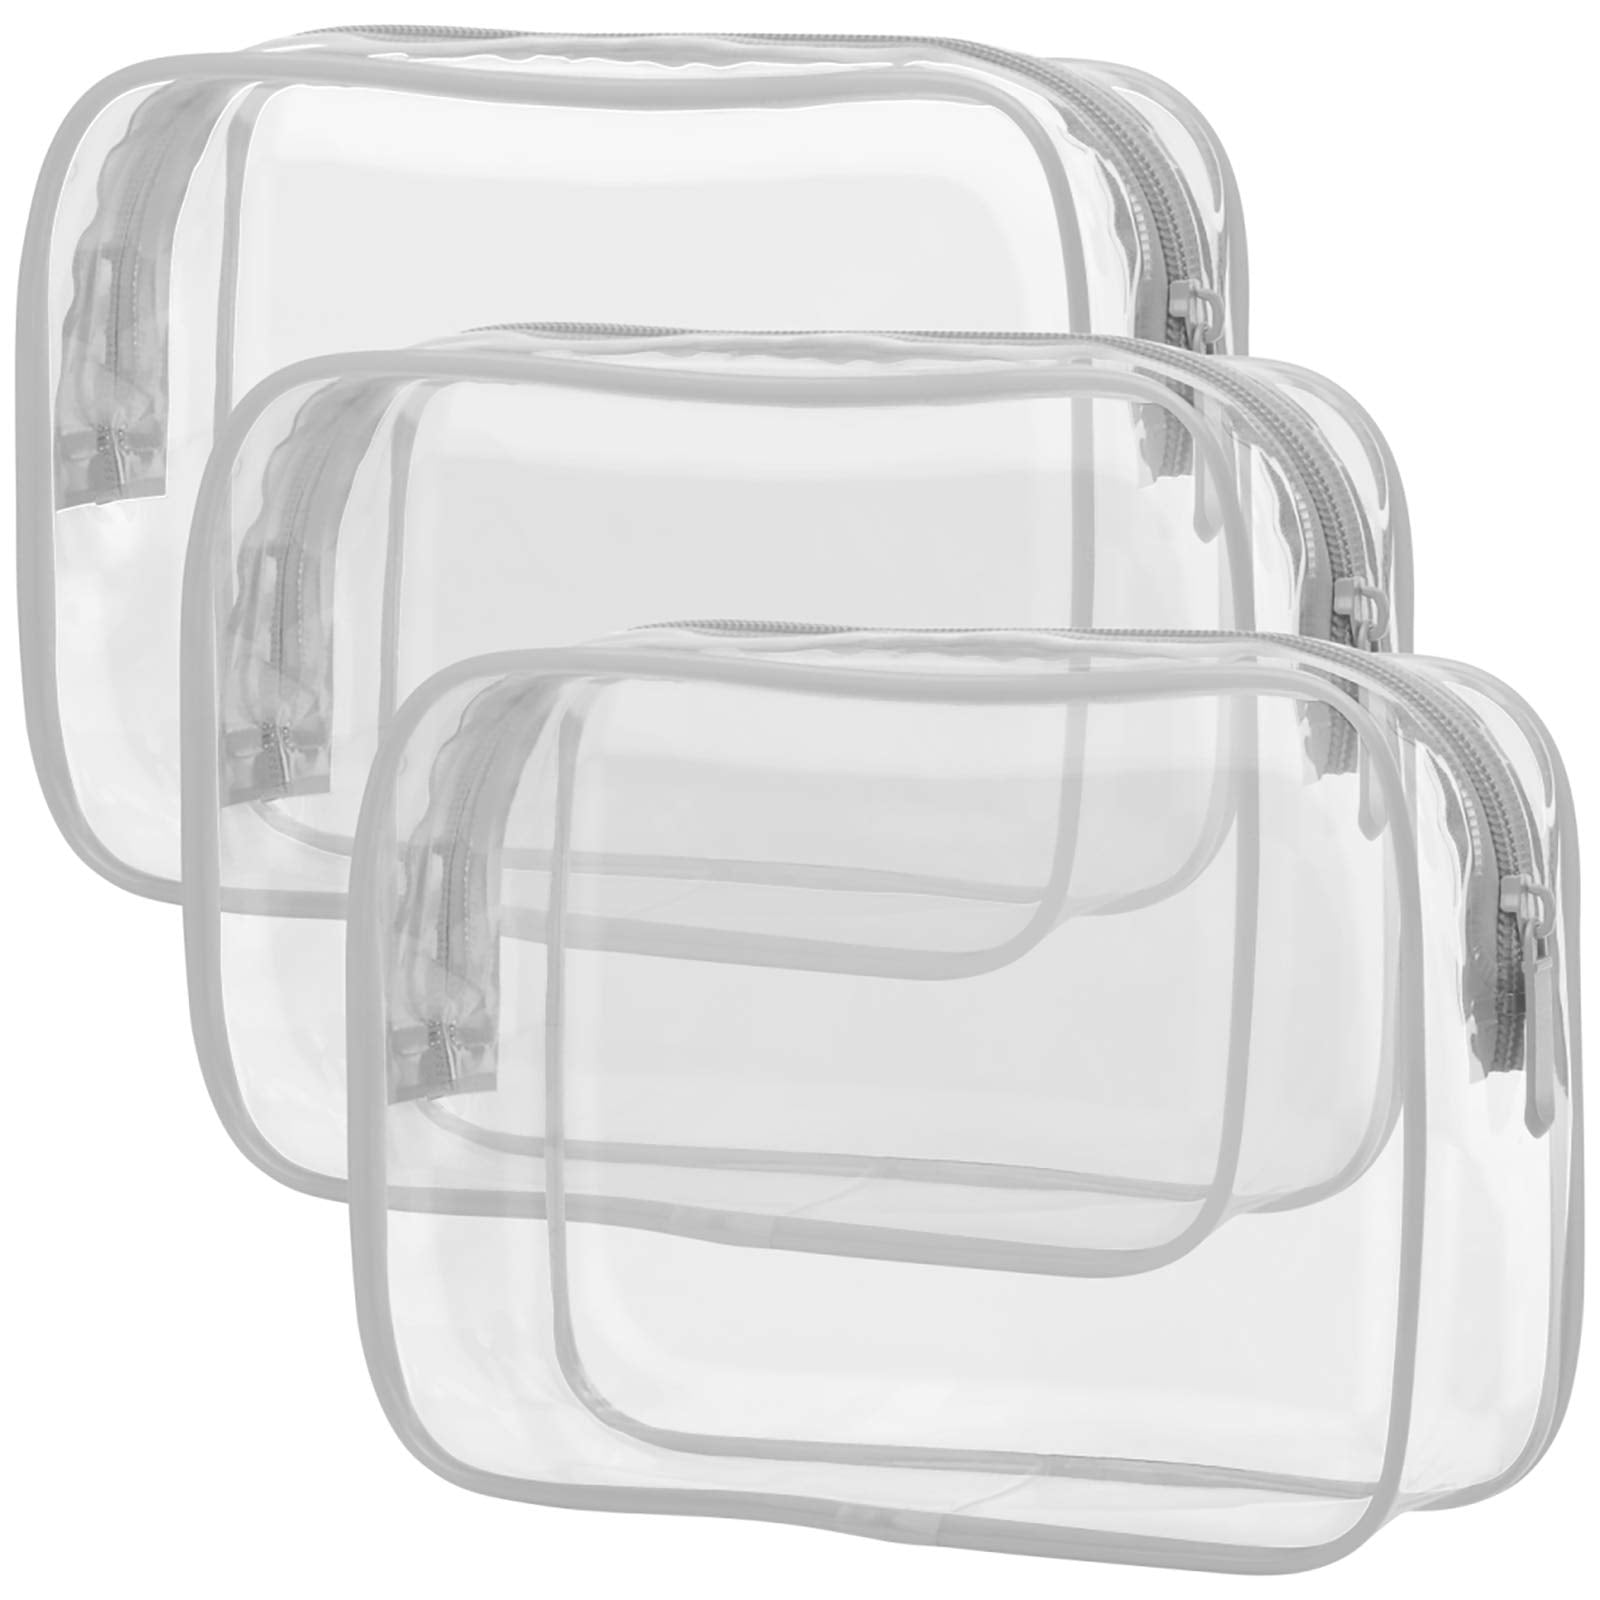 Transparent grooming pouch for travel